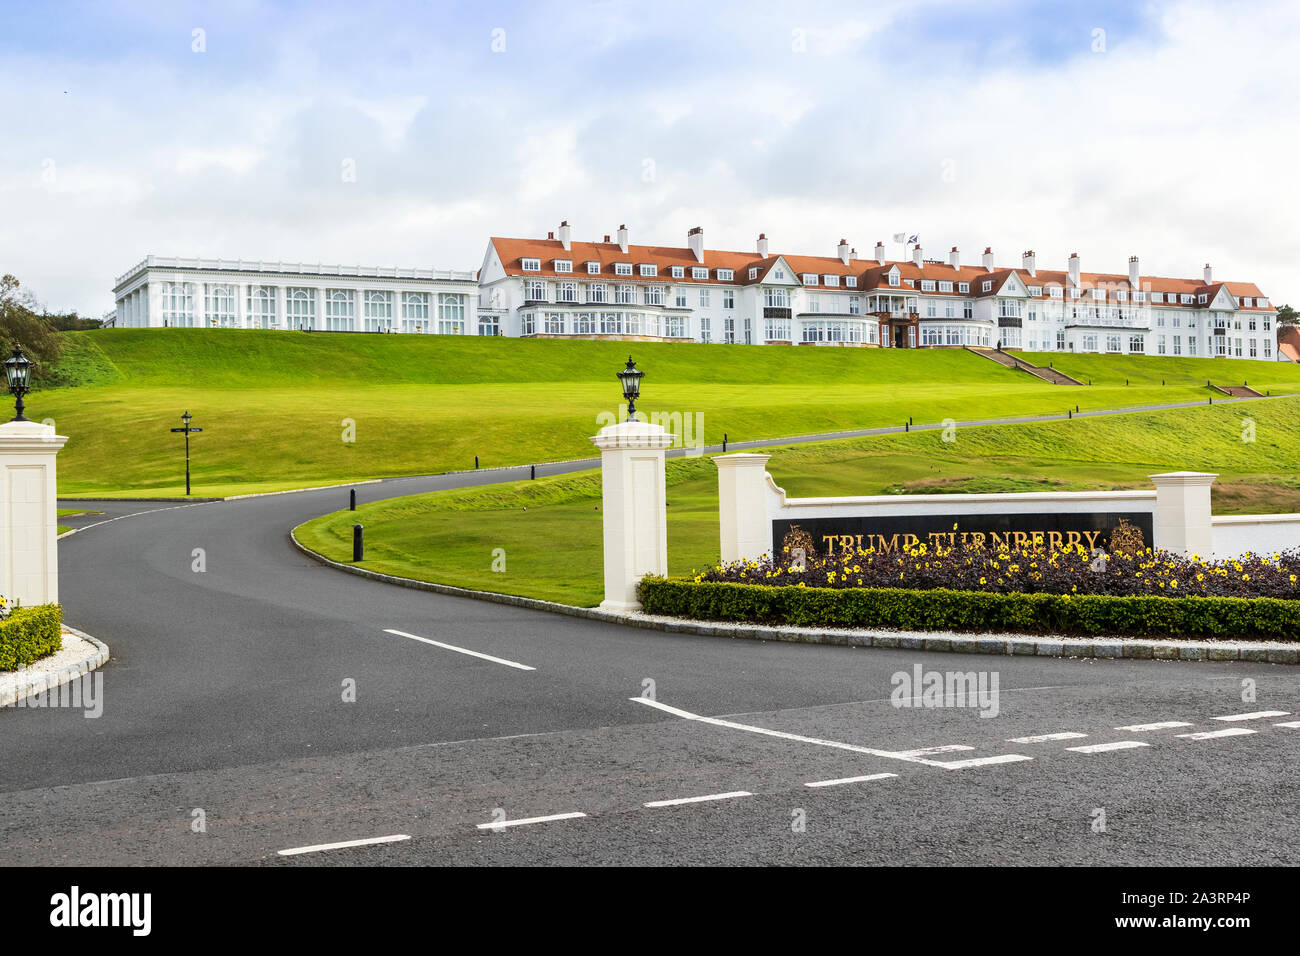 Trump Turnberry Hotel and Golf resort, showing the main access road, Turnberry, Ayrshire, Scotland, UK Stock Photo